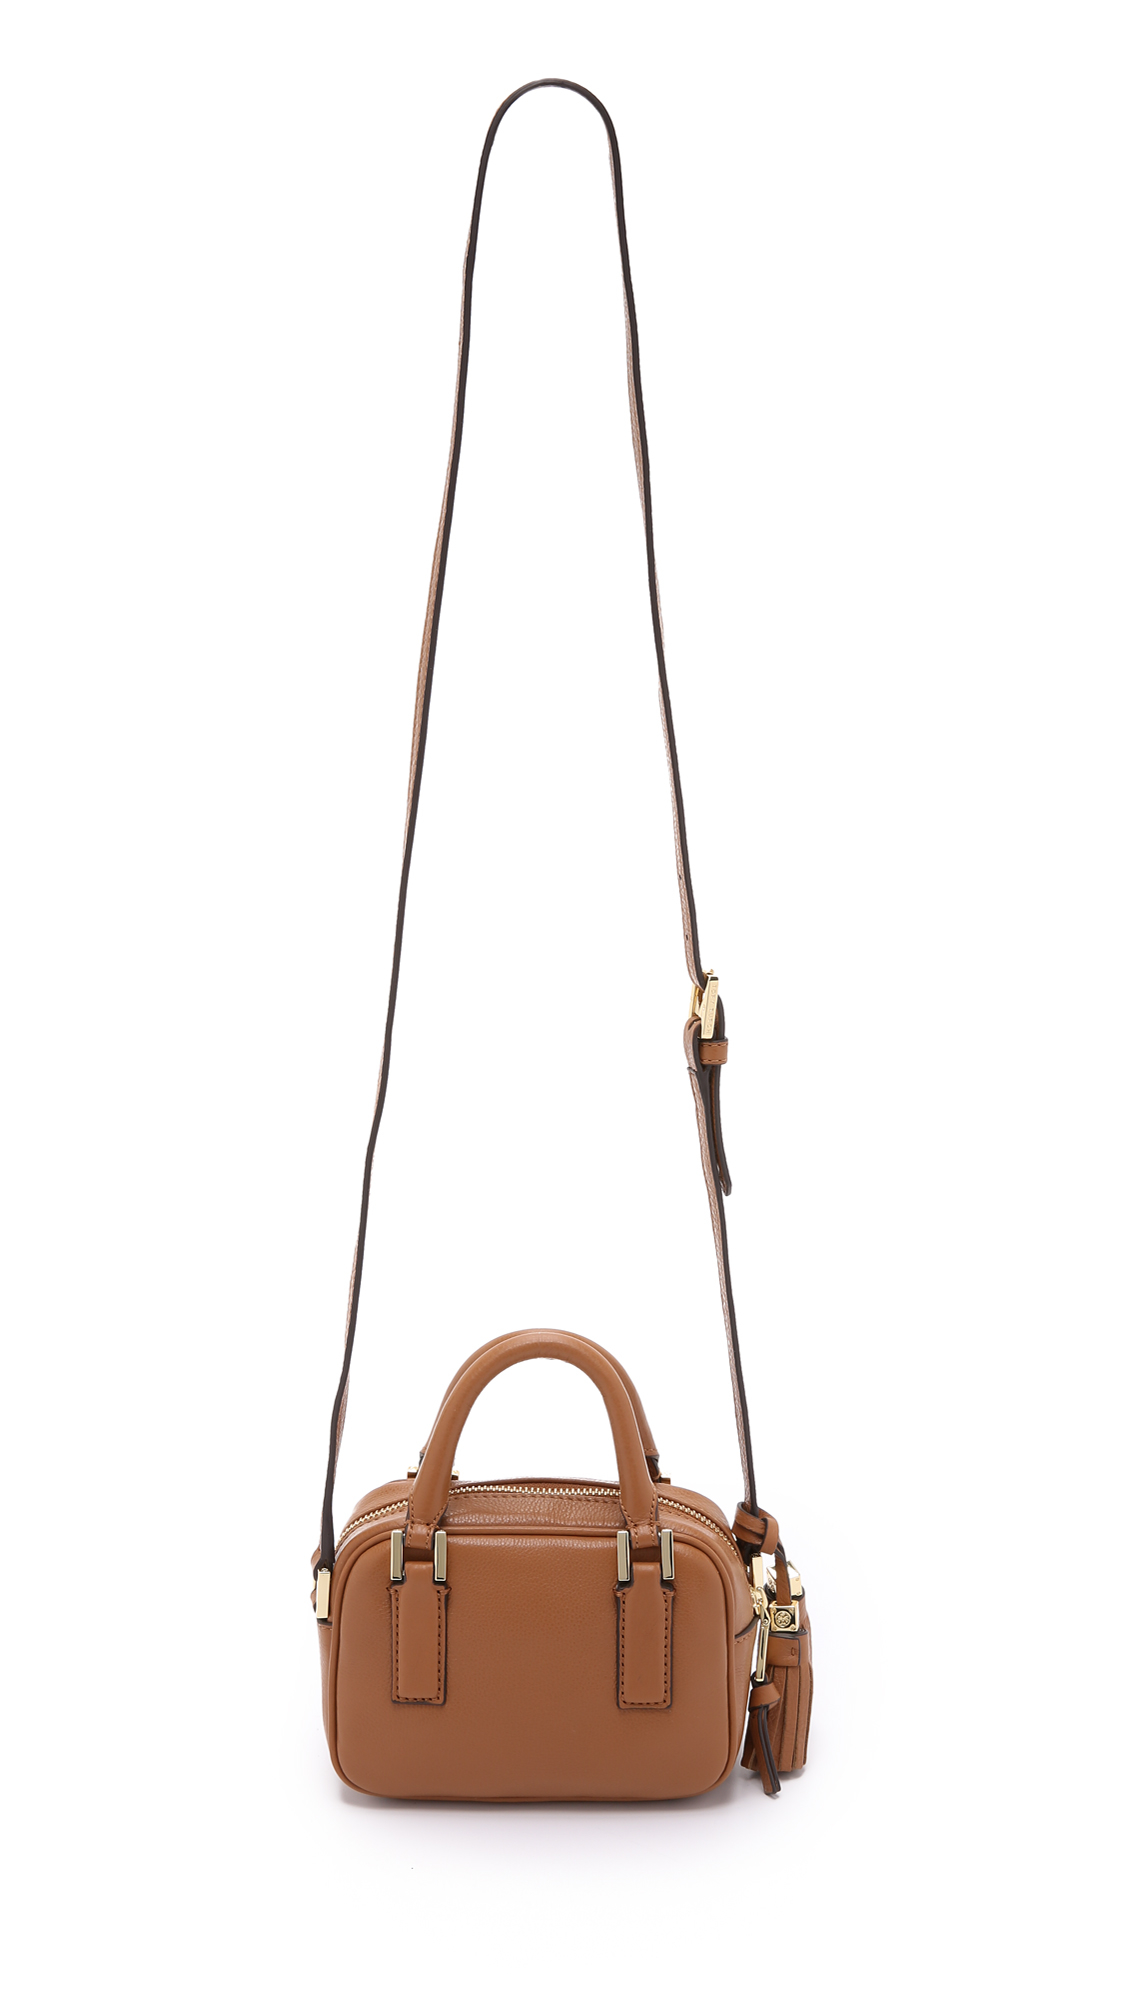 Tory Burch Thea Small Satchel – The MIX Belize